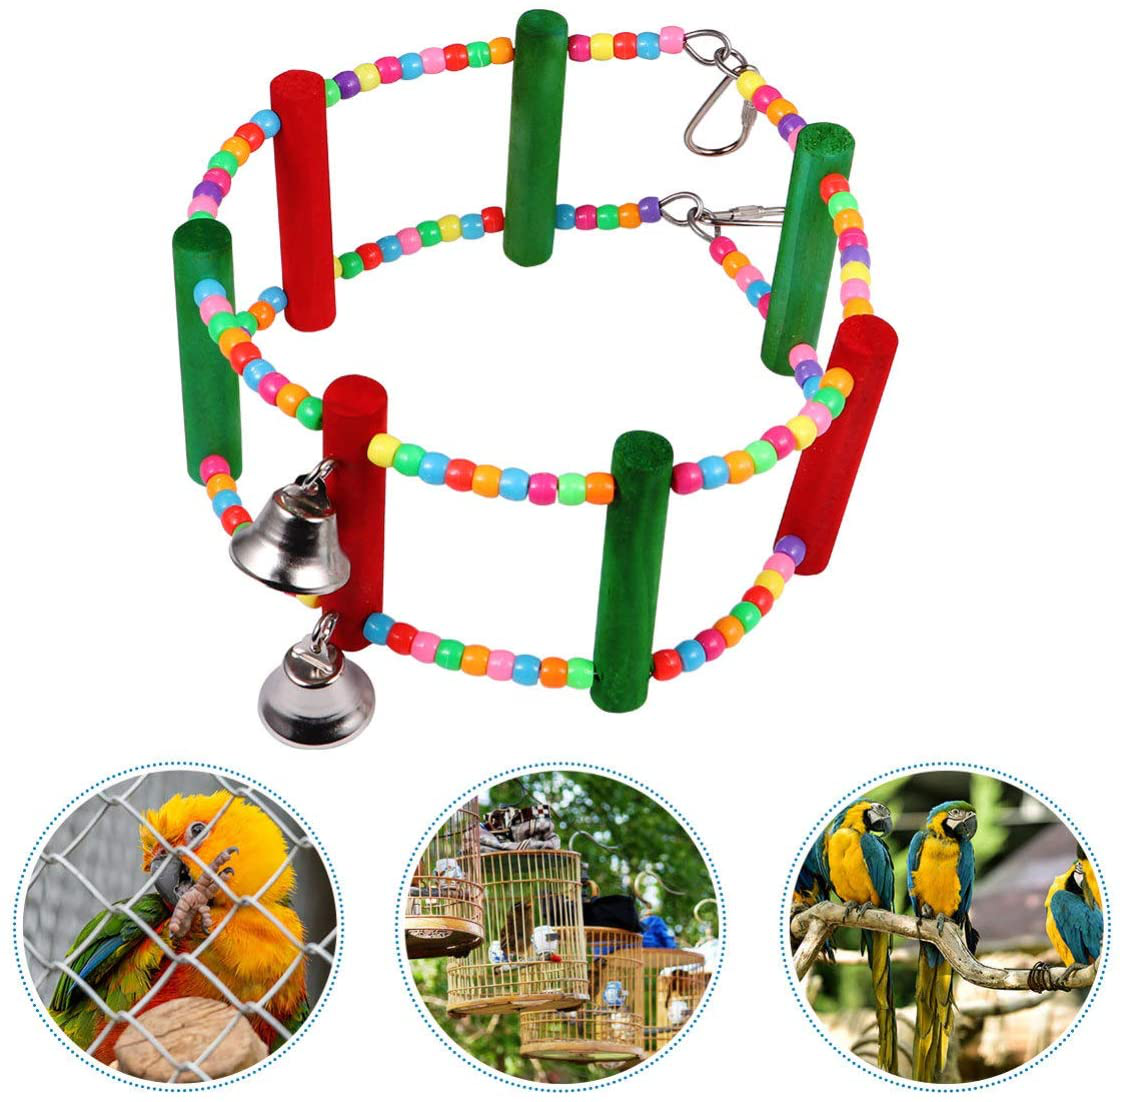 POPETPOP Bird Chewing Perch with Bell Cage Accessories Decorating Birdcage or Wood Parrot Perch Stand Play Gym